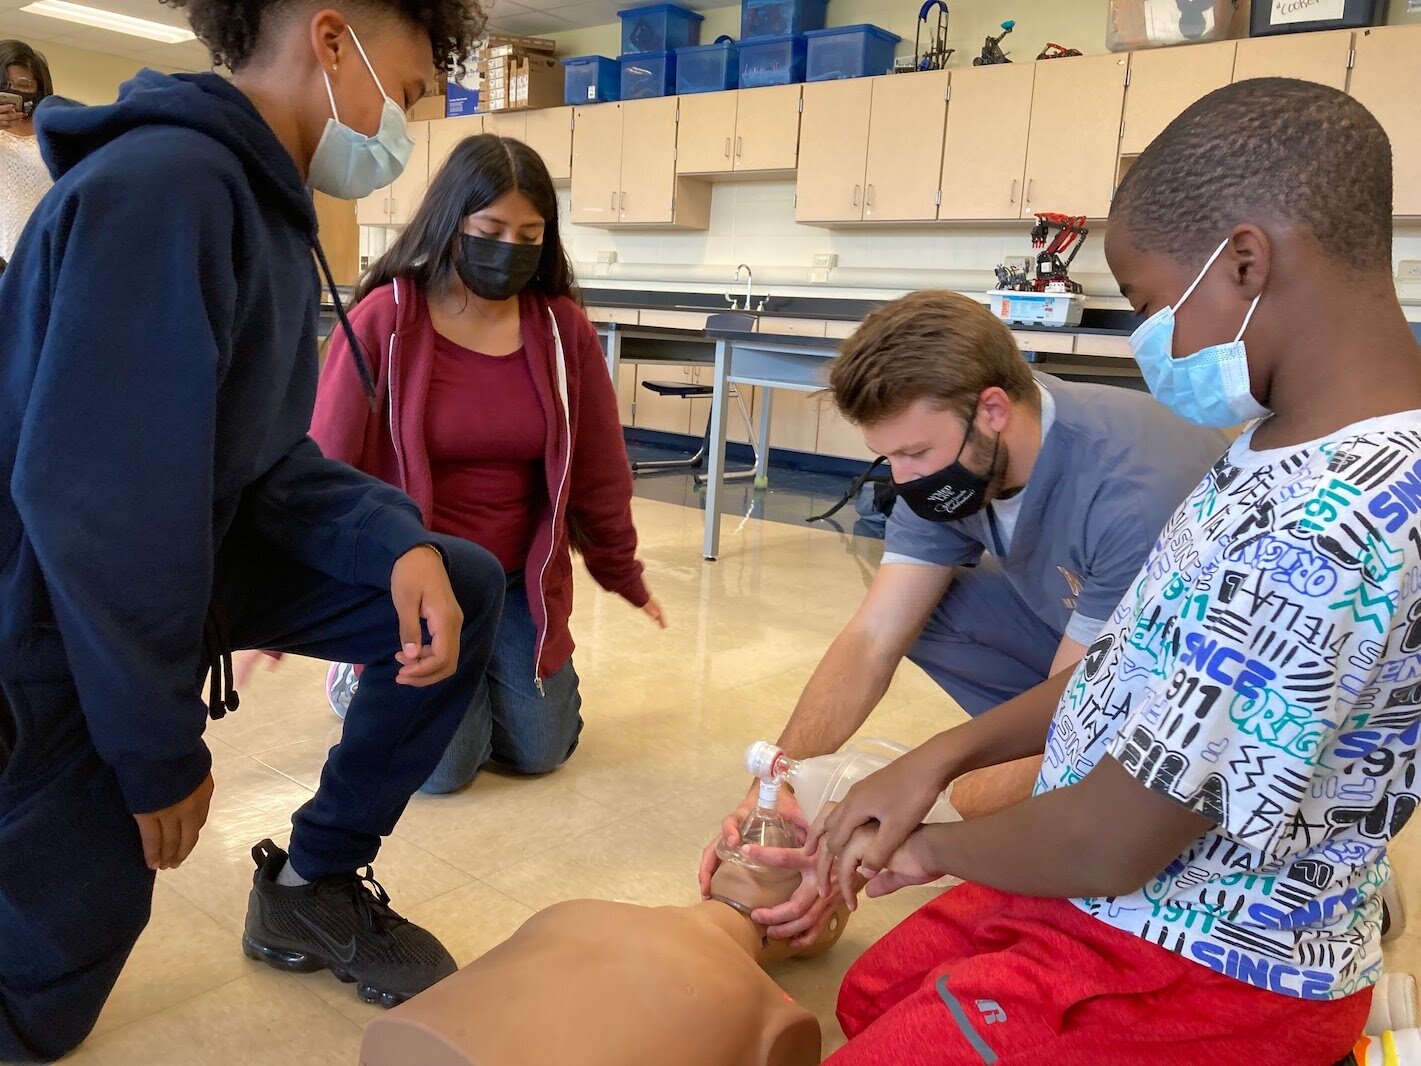 Kevin Steknik, a second-year medical student shows, from left, Jonavan Hare, Rose Hernandez, and Nathaniel Collier, how to bag a patient during the Early Introduction to Health Careers 1.5 program at Milwood Magnet School.